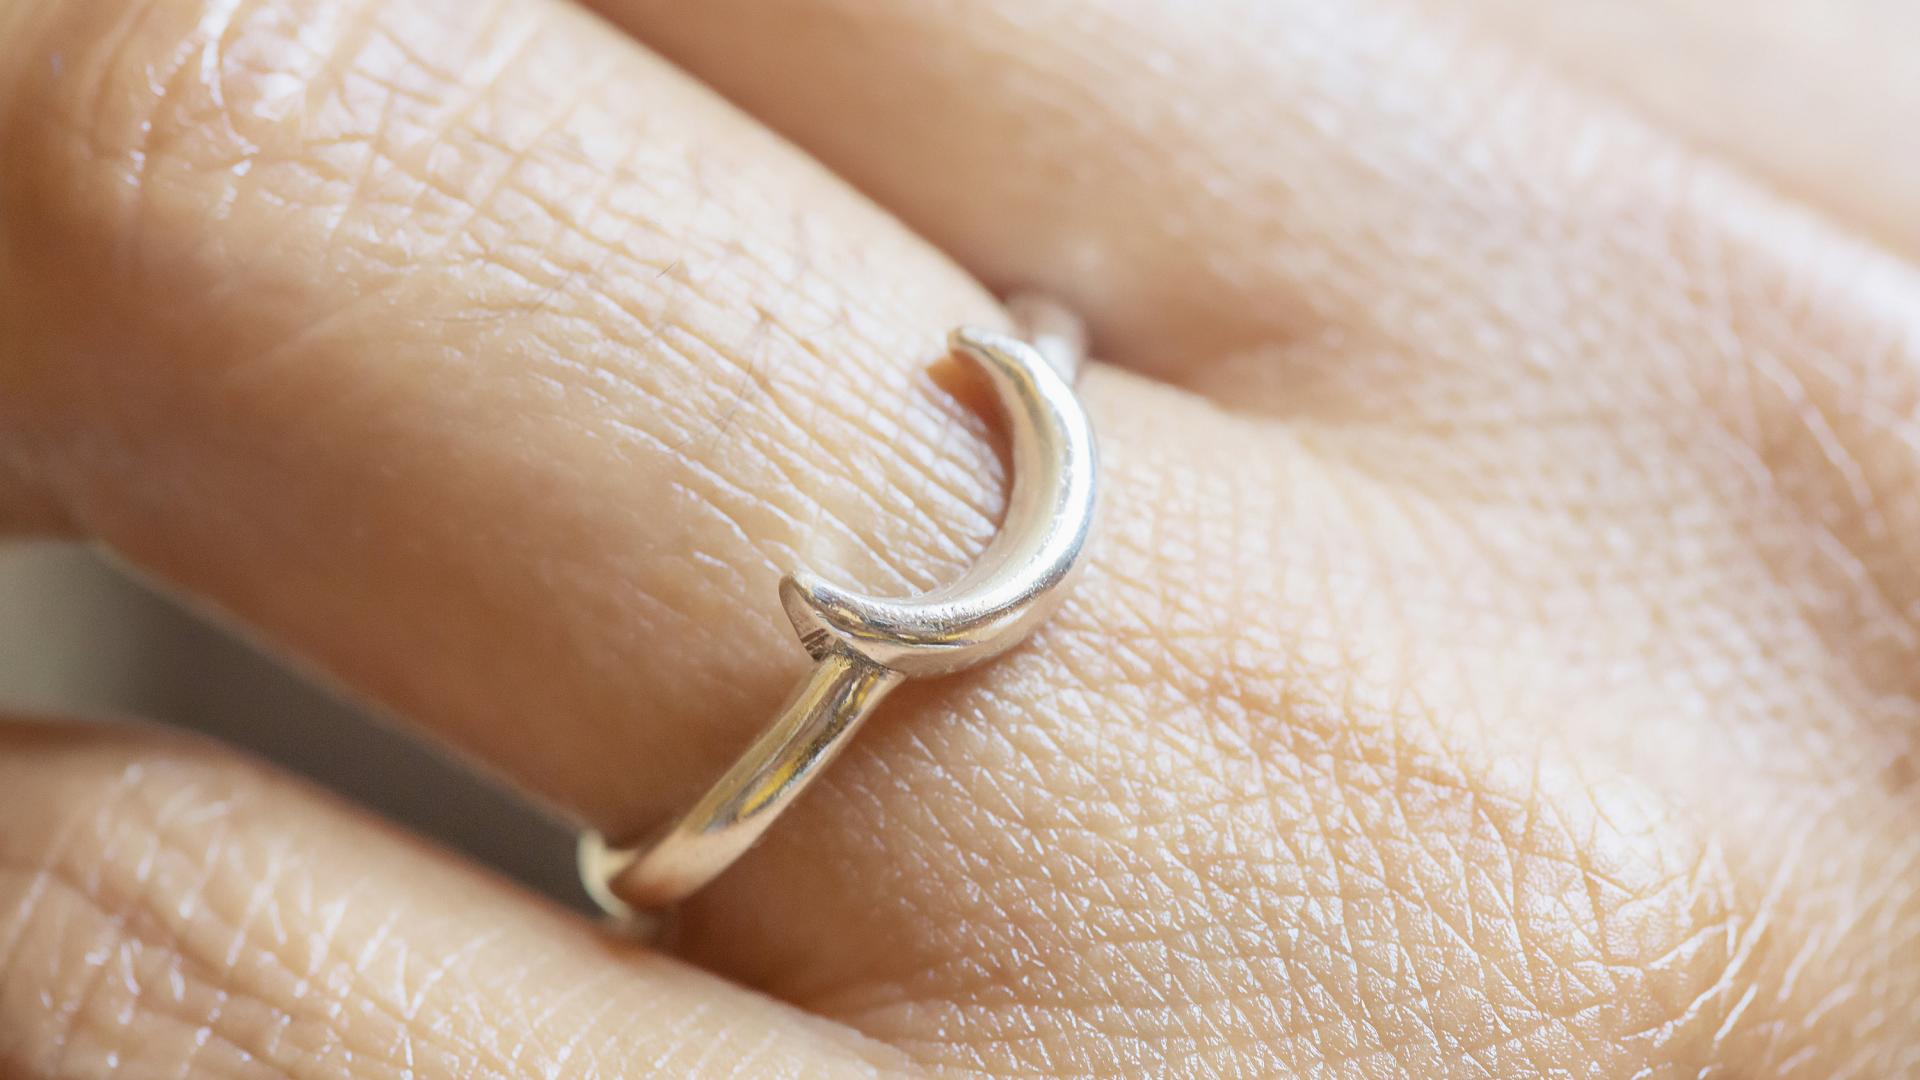 The Little Moon Ring 